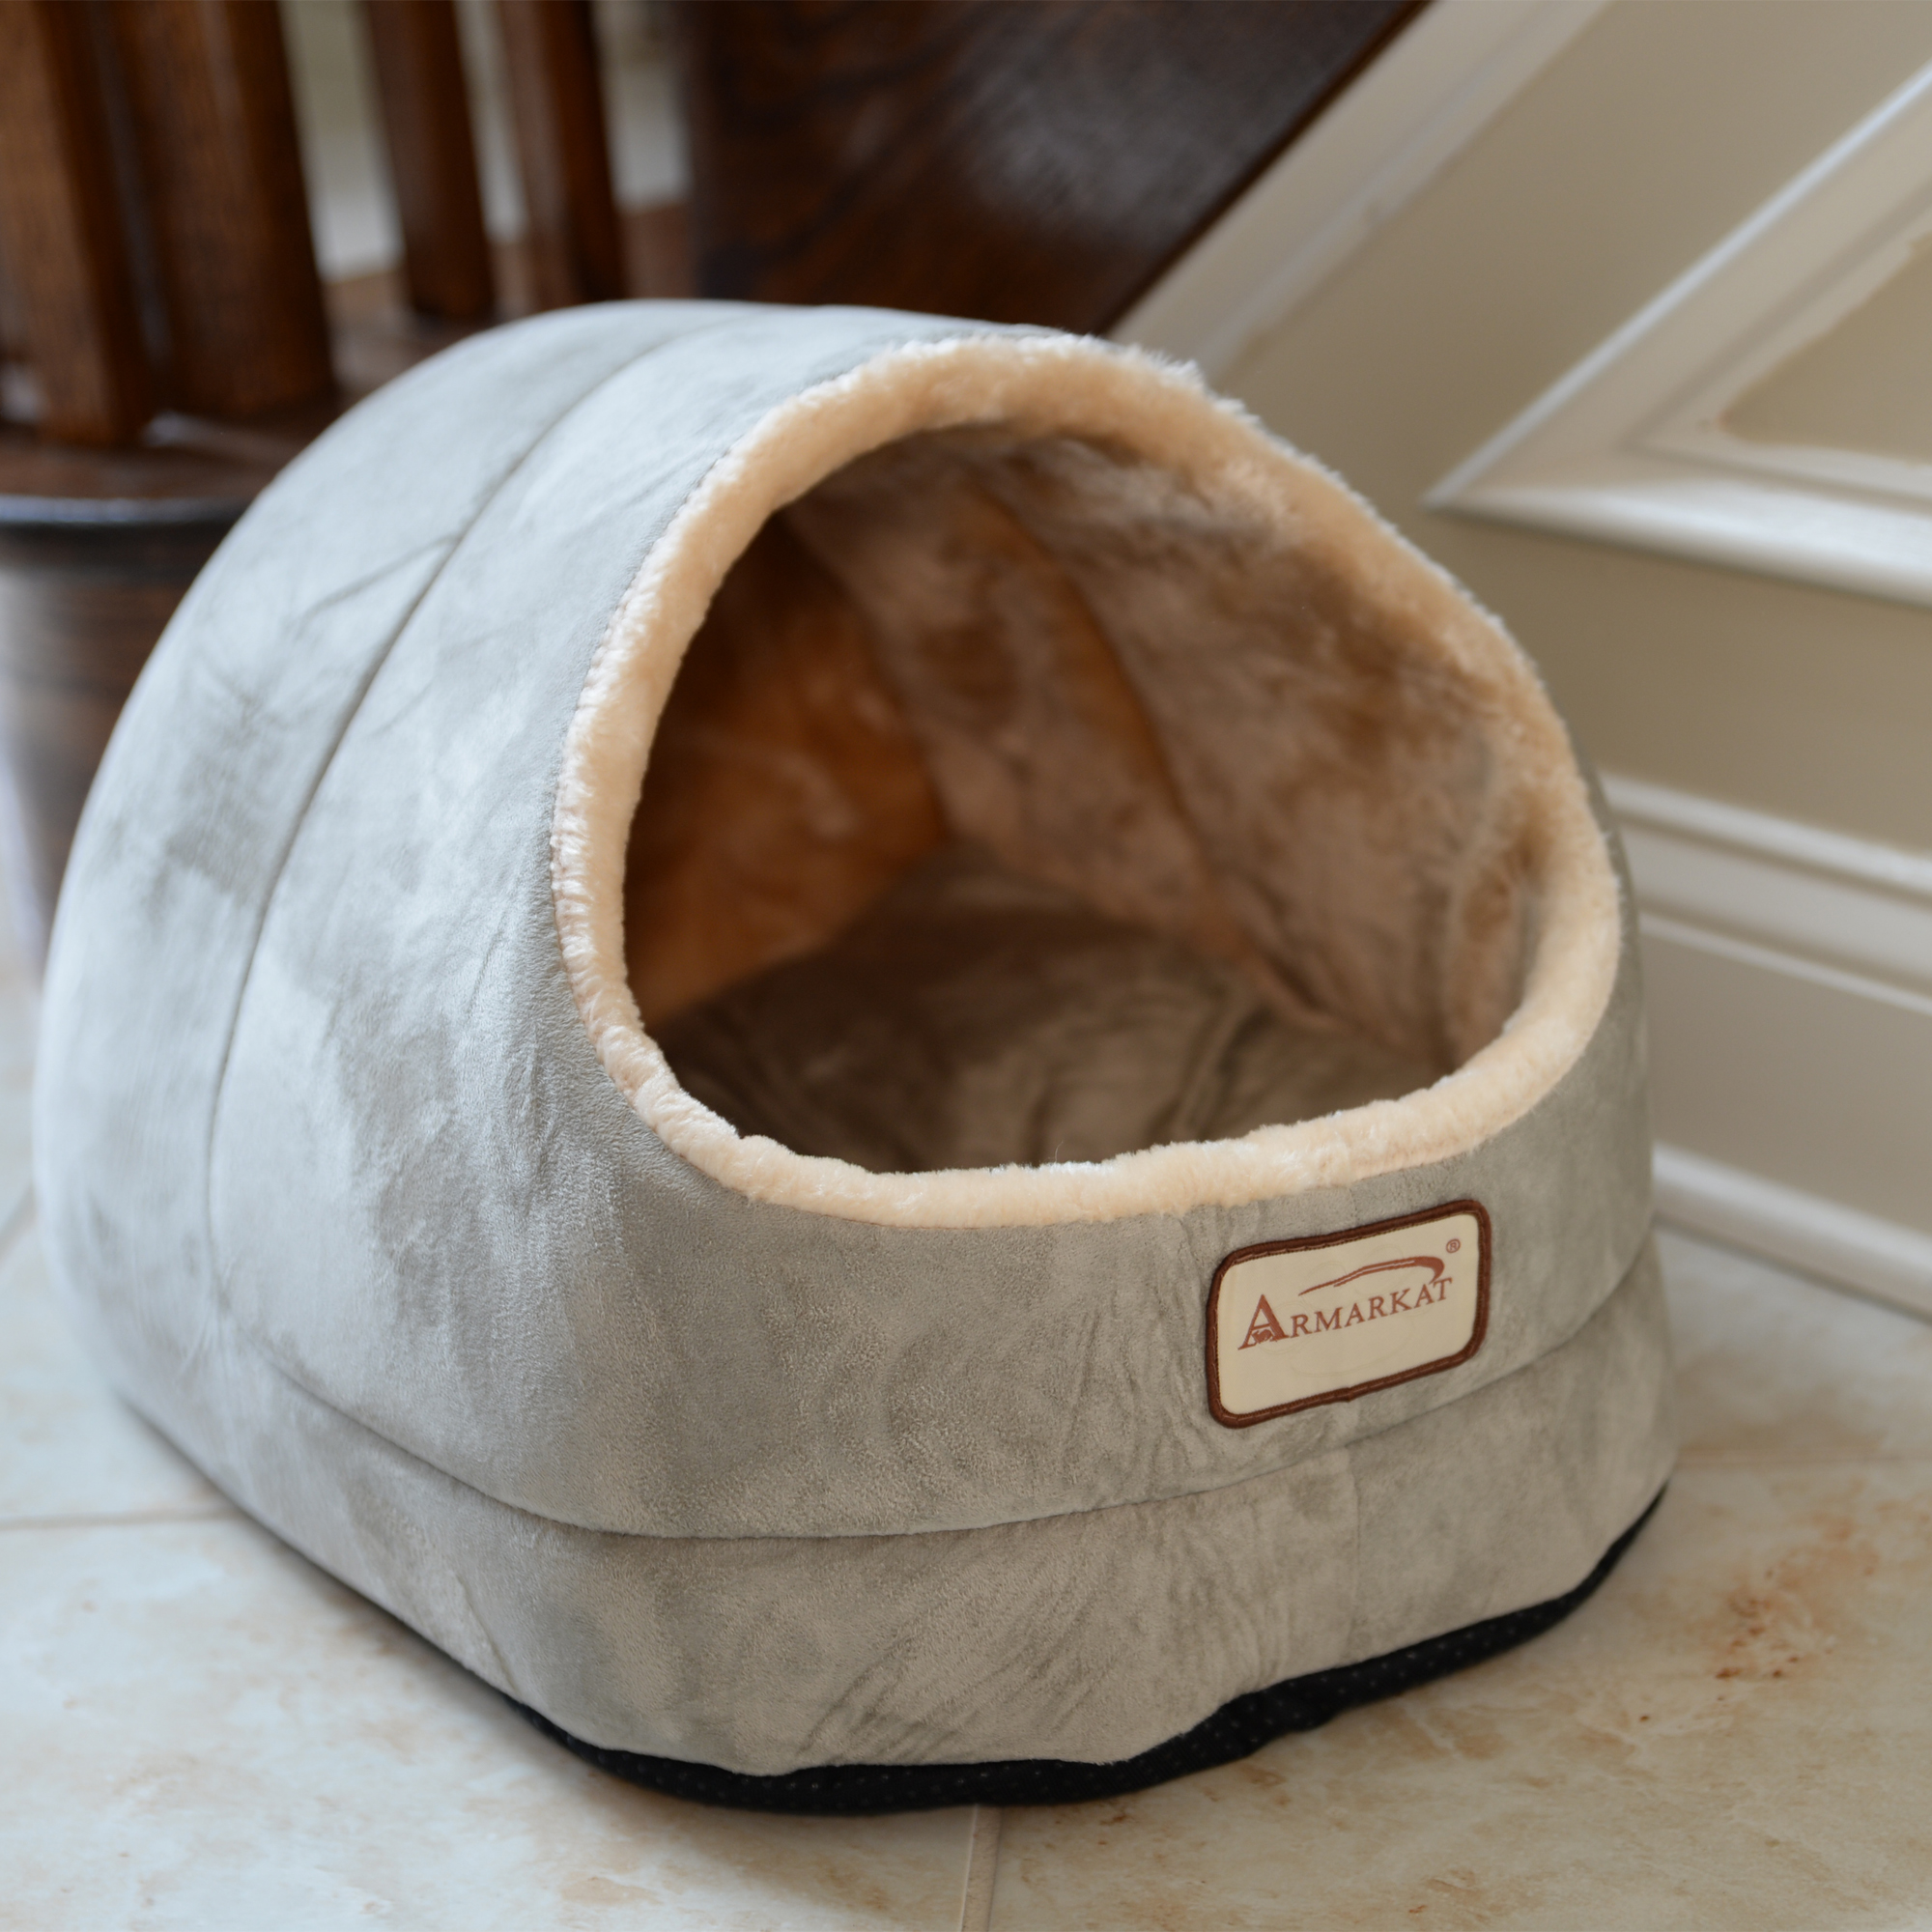 Picture of Aeromark C18HHL-MH Armarkat Pet Bed Cat Bed 18 x 12 x 14 - Sage green & Beige